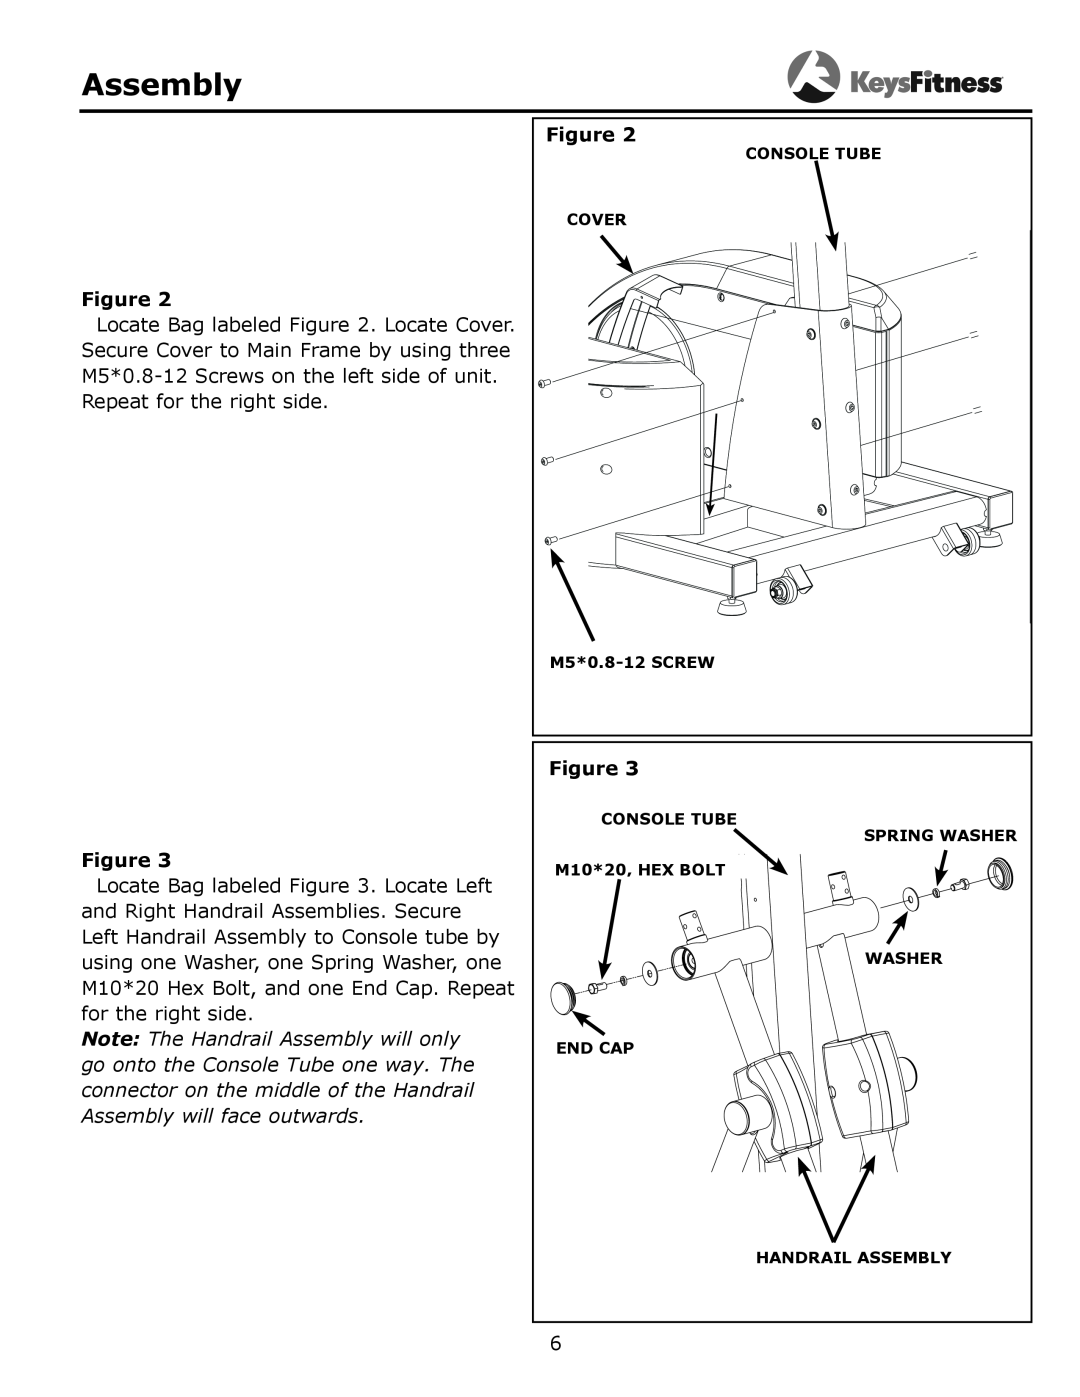 Keys Fitness 315-00106 owner manual Assembly, Repeat for the right side 